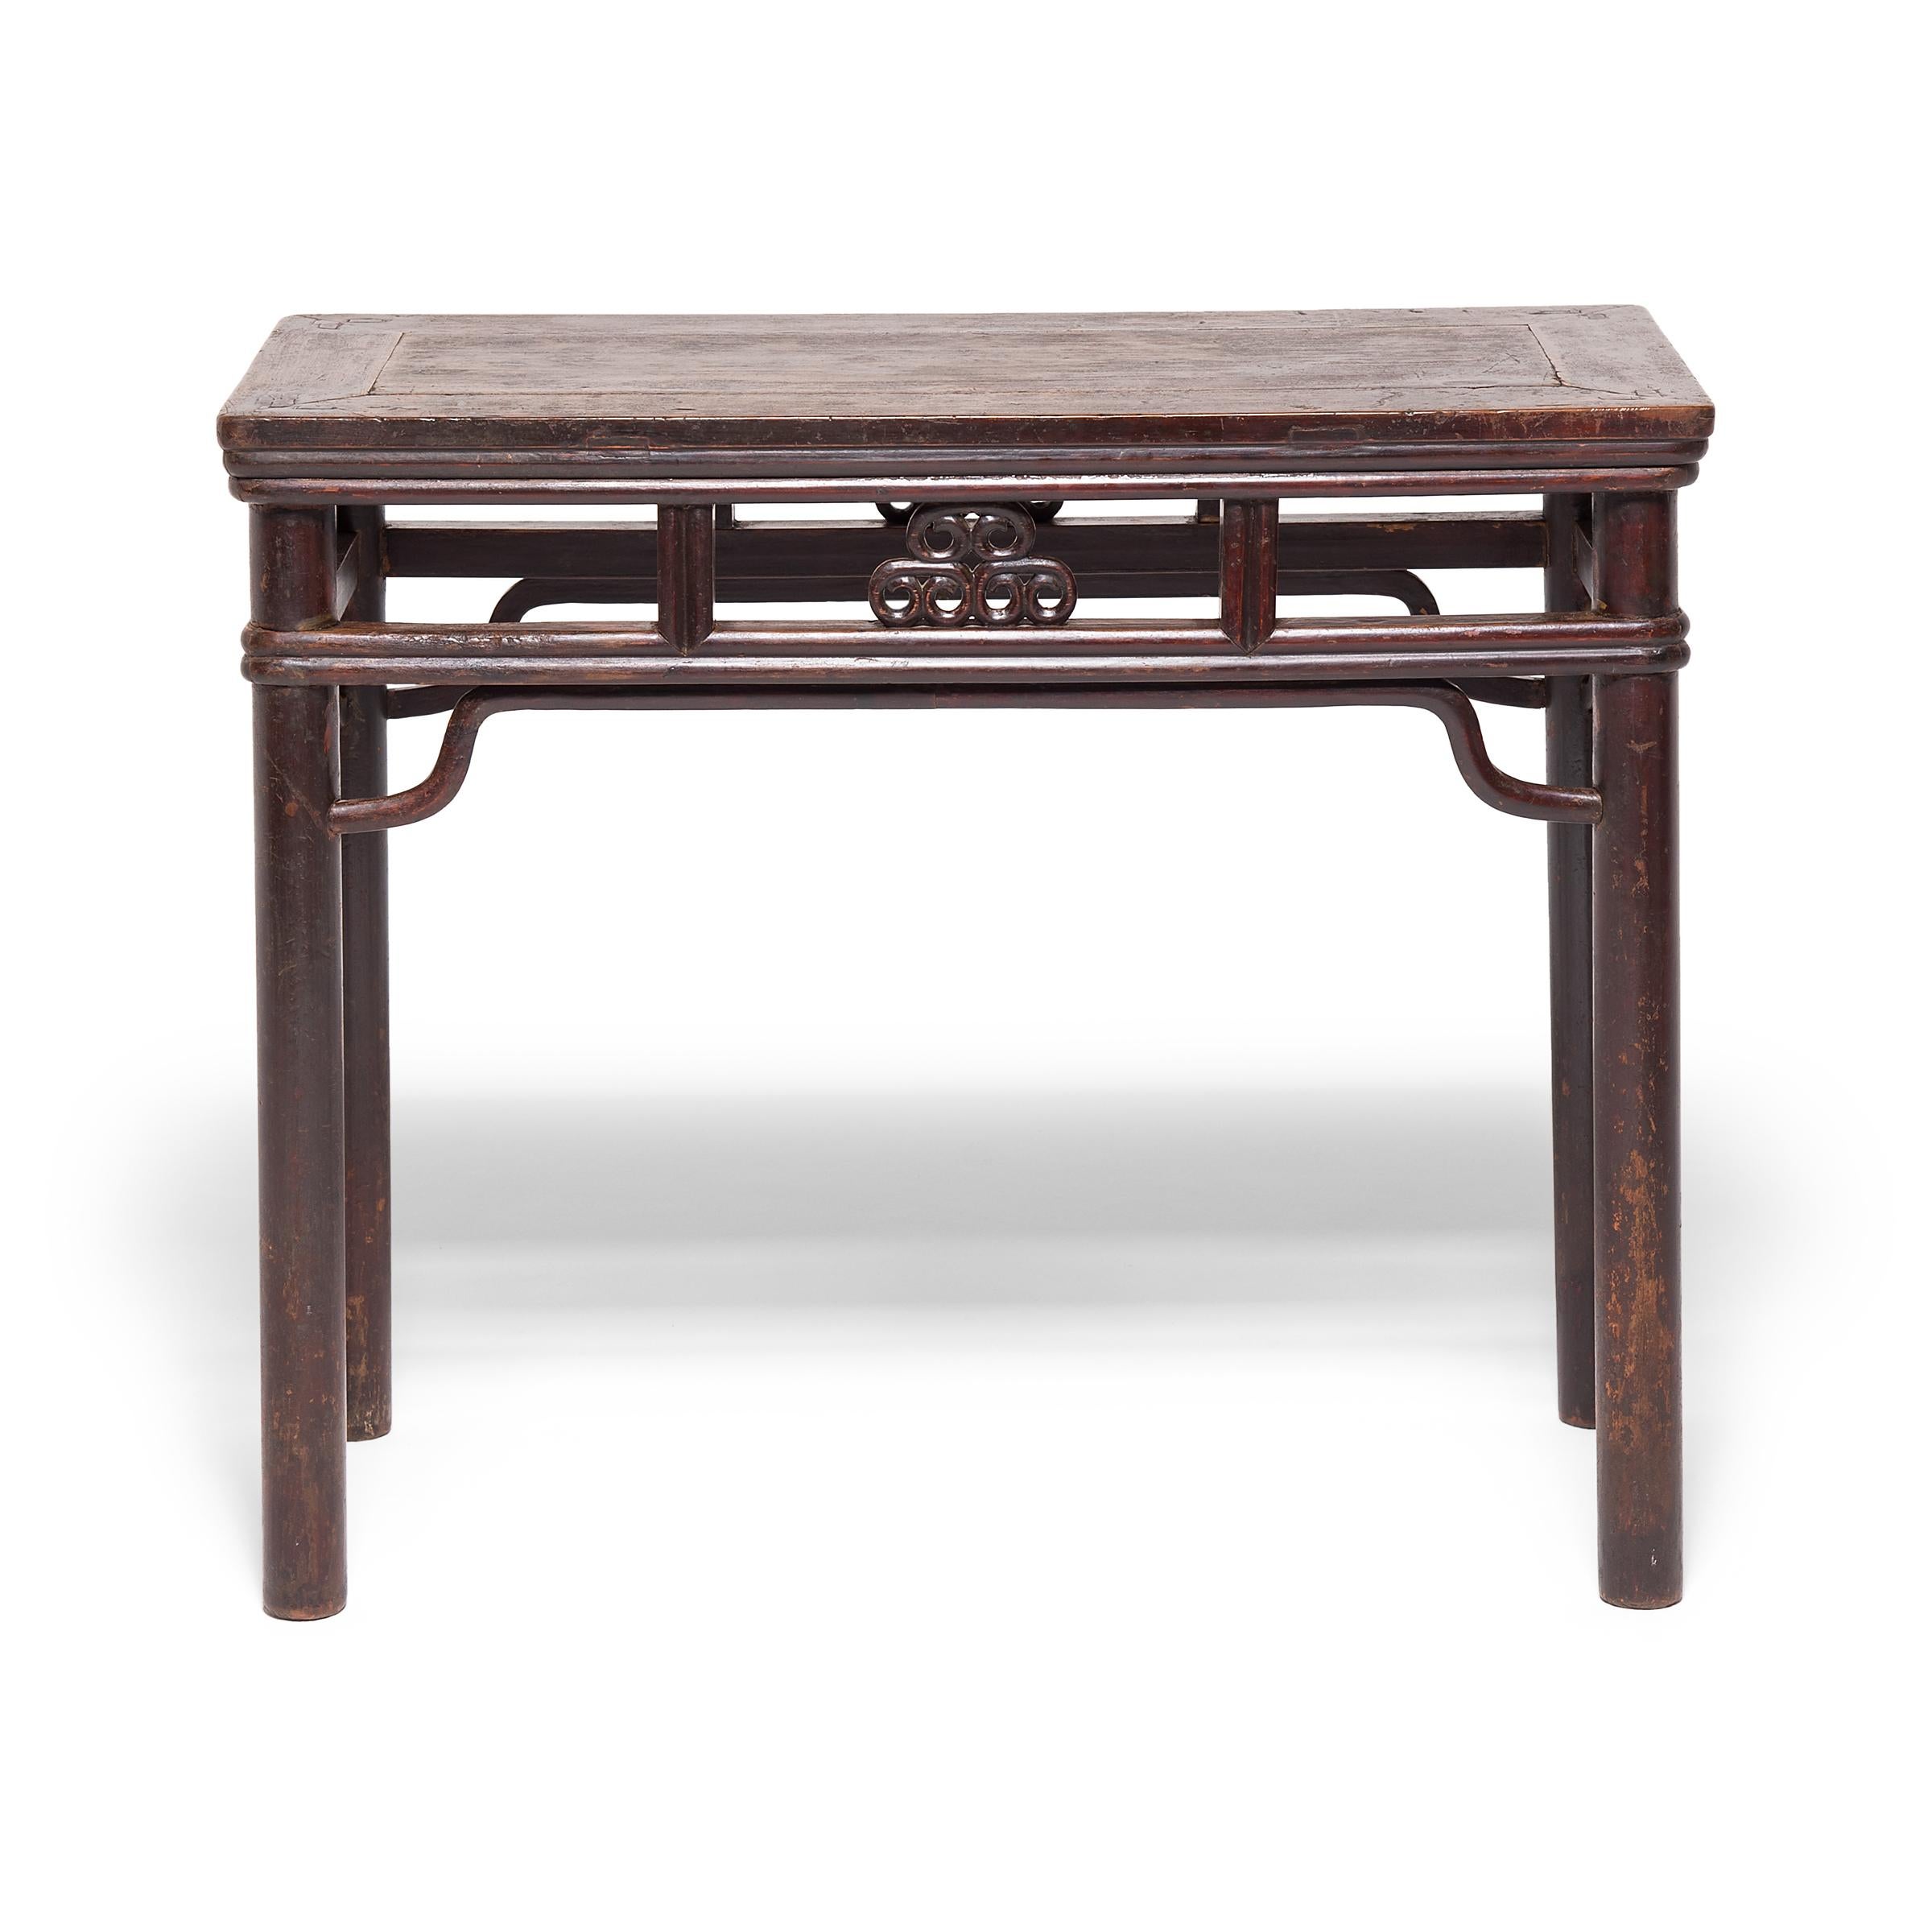 This exquisite 19th-century wine table was crafted of walnut sourced from the forests of China’s Hebei province. The table charms with round legs, gently curving stretchers, and a delicate apron carved with interlocking rings, a symbol of longevity.